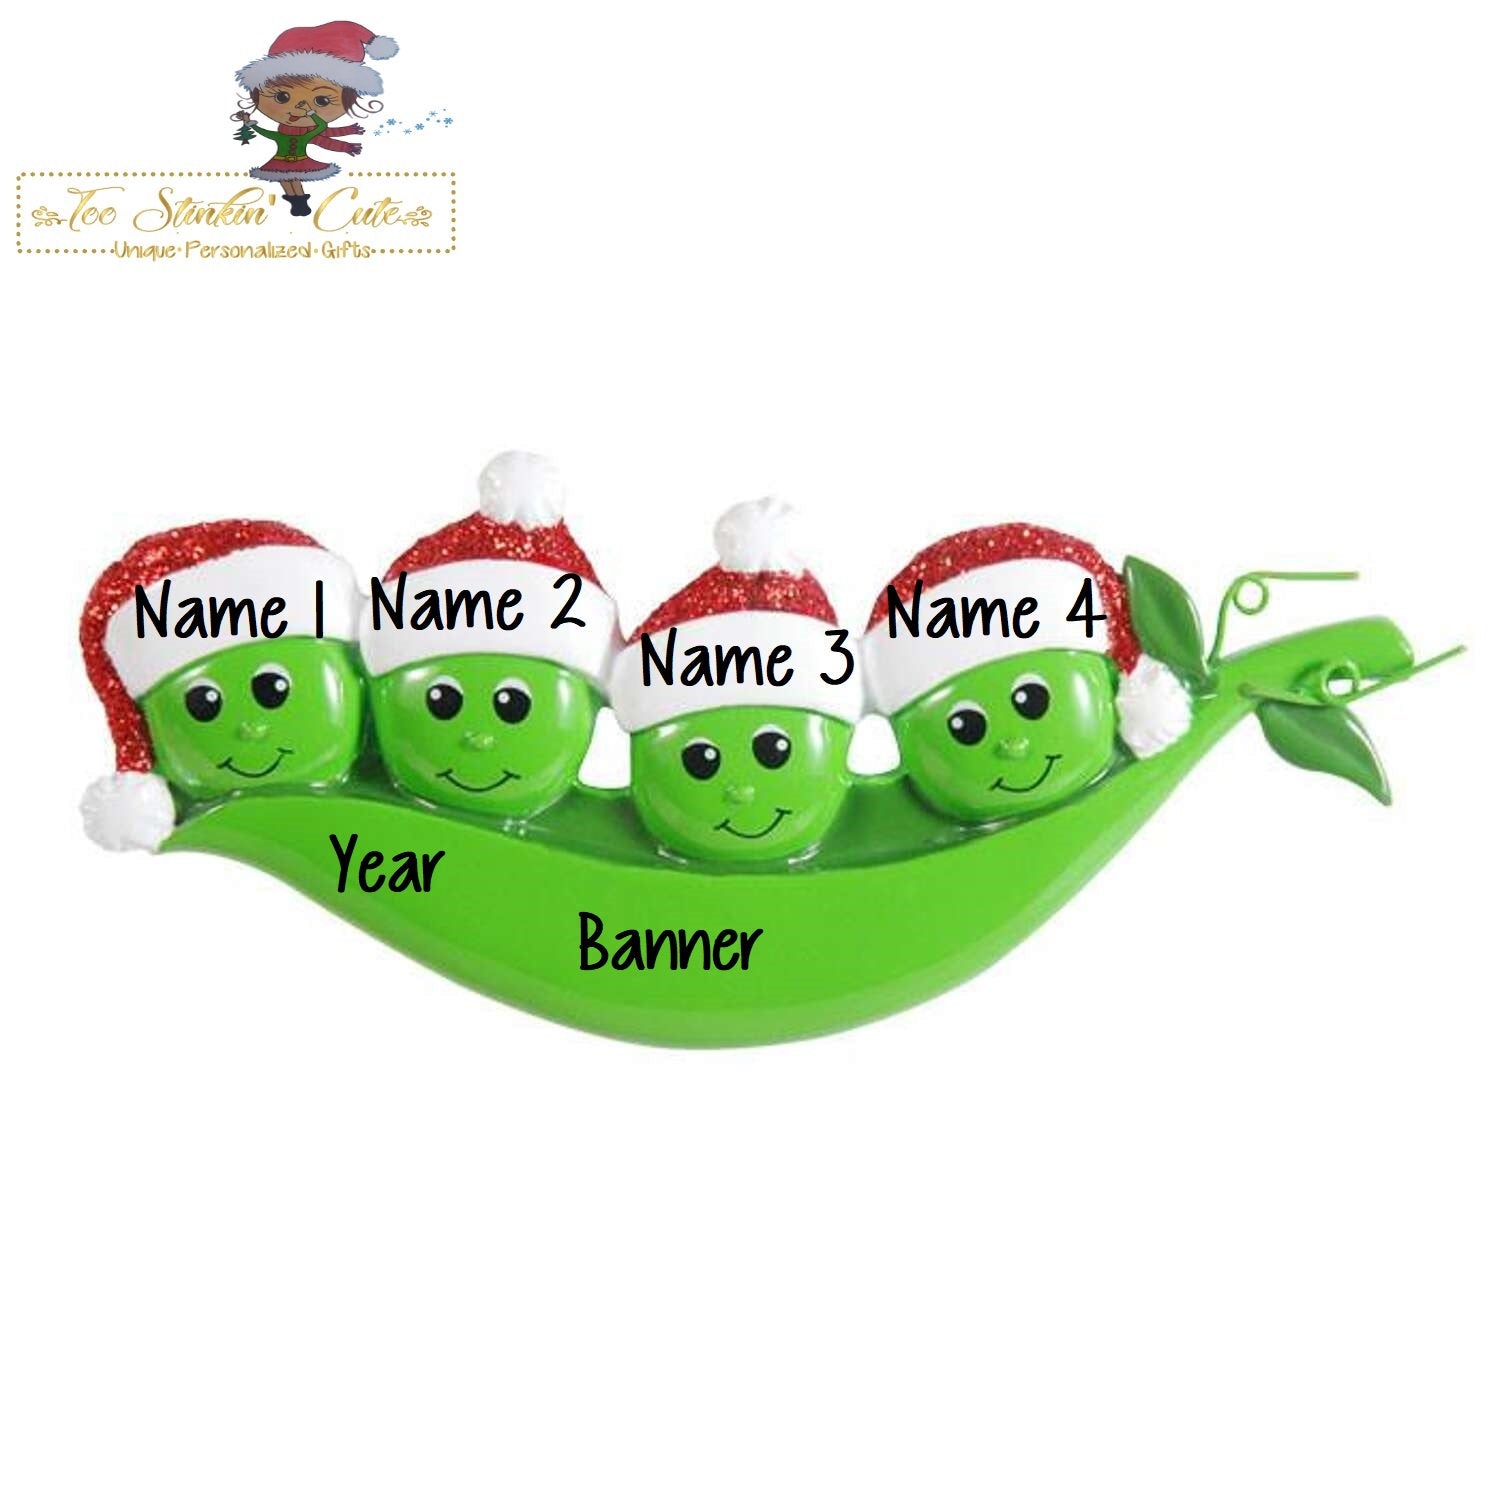 Christmas Ornament Pea Family of 4/ Friends/ Pea Pod/ Coworkers Personalized! + Free Shipping!